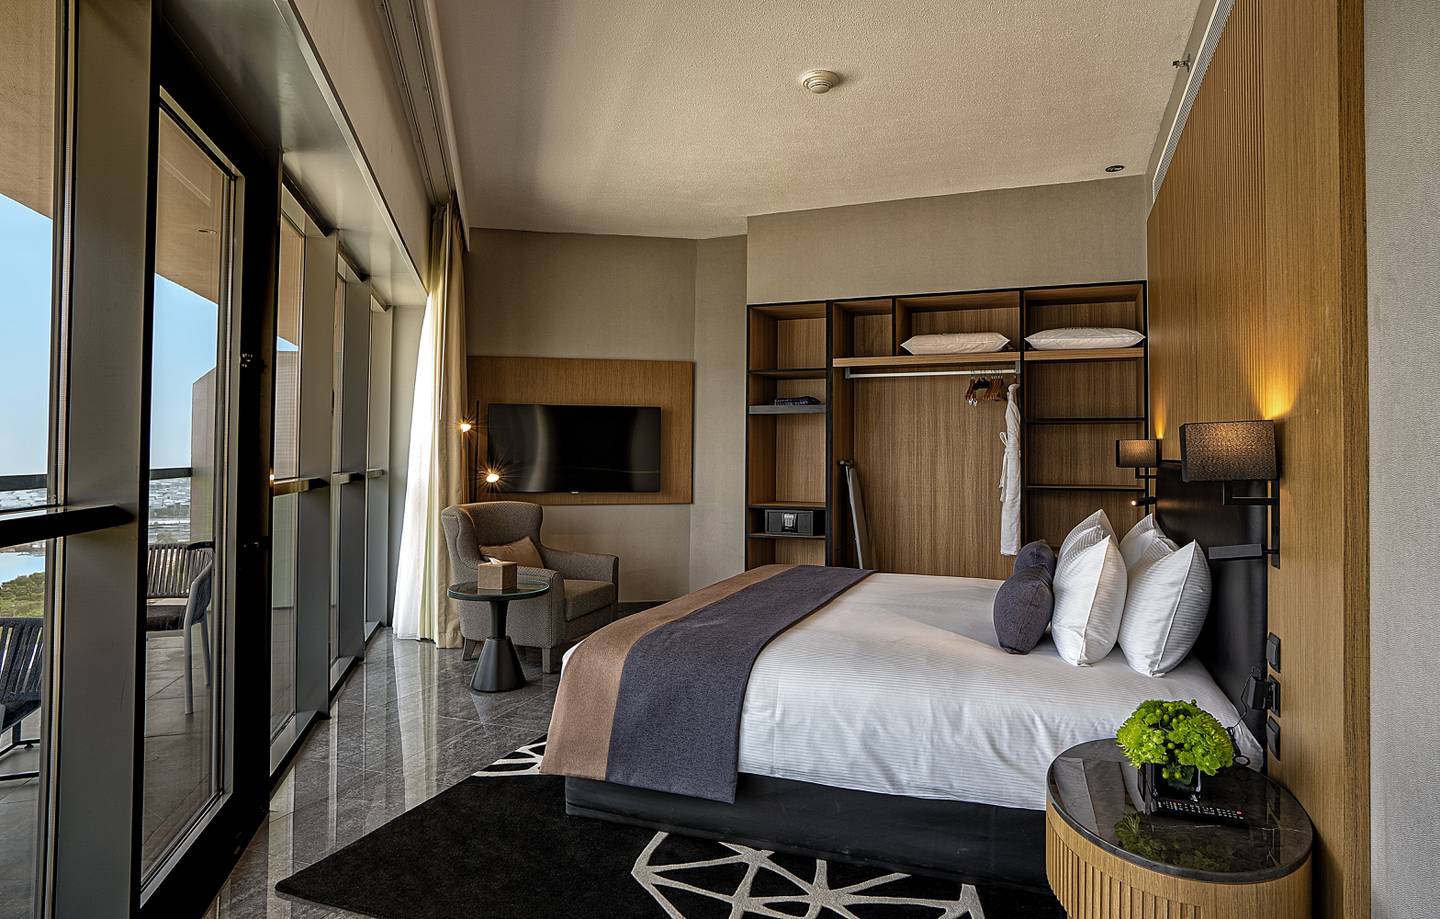 First Collection Business Bay has 437 rooms and suites. Photo: The First Collection